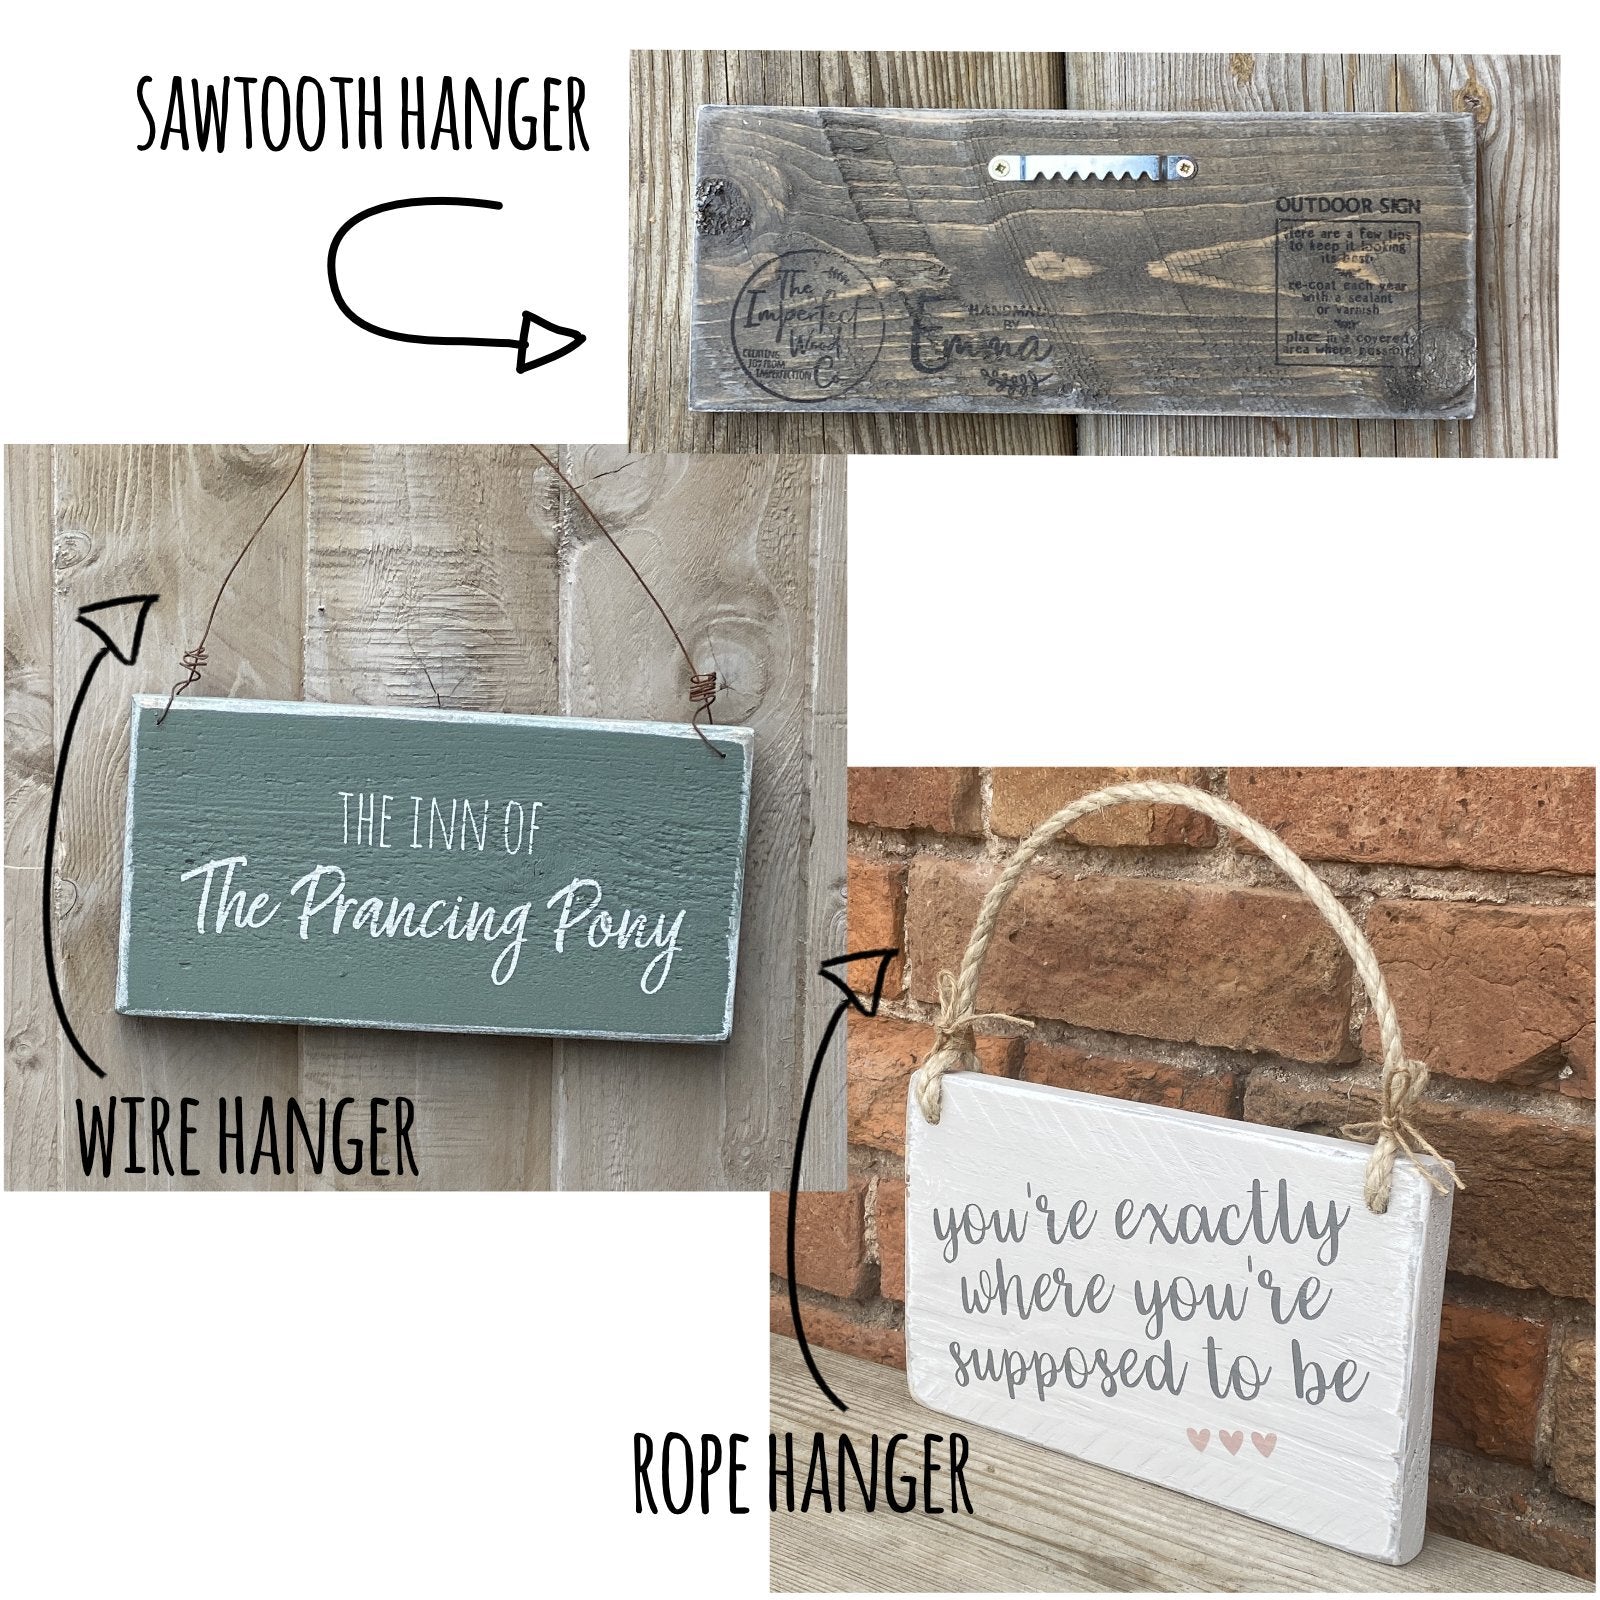 You make this world a better place | Reclaimed Wood Sign - The Imperfect Wood Company - Hanging Wood Sign